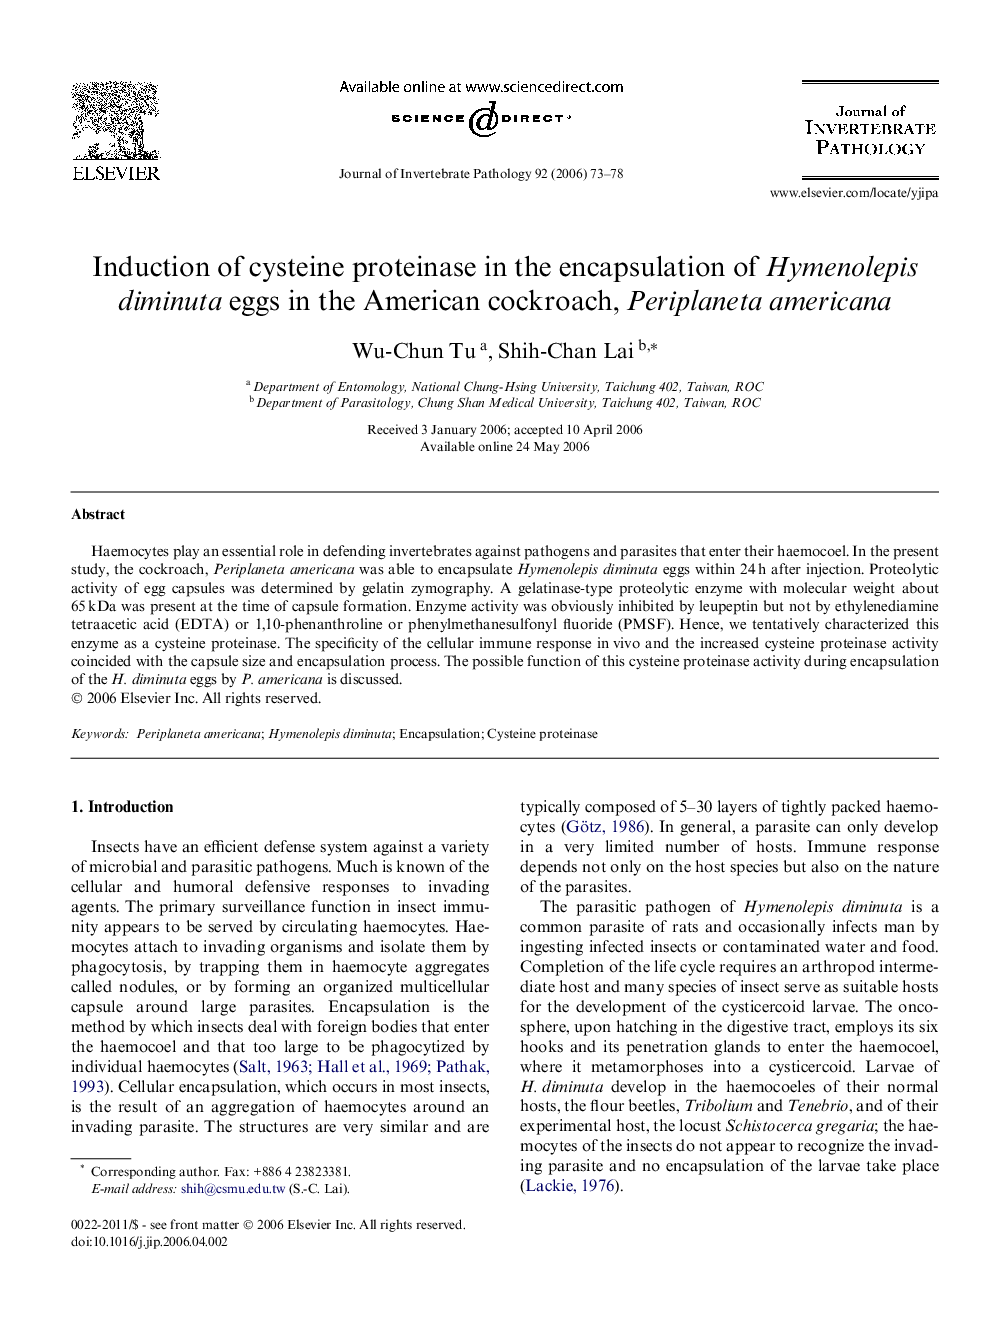 Induction of cysteine proteinase in the encapsulation of Hymenolepis diminuta eggs in the American cockroach, Periplaneta americana